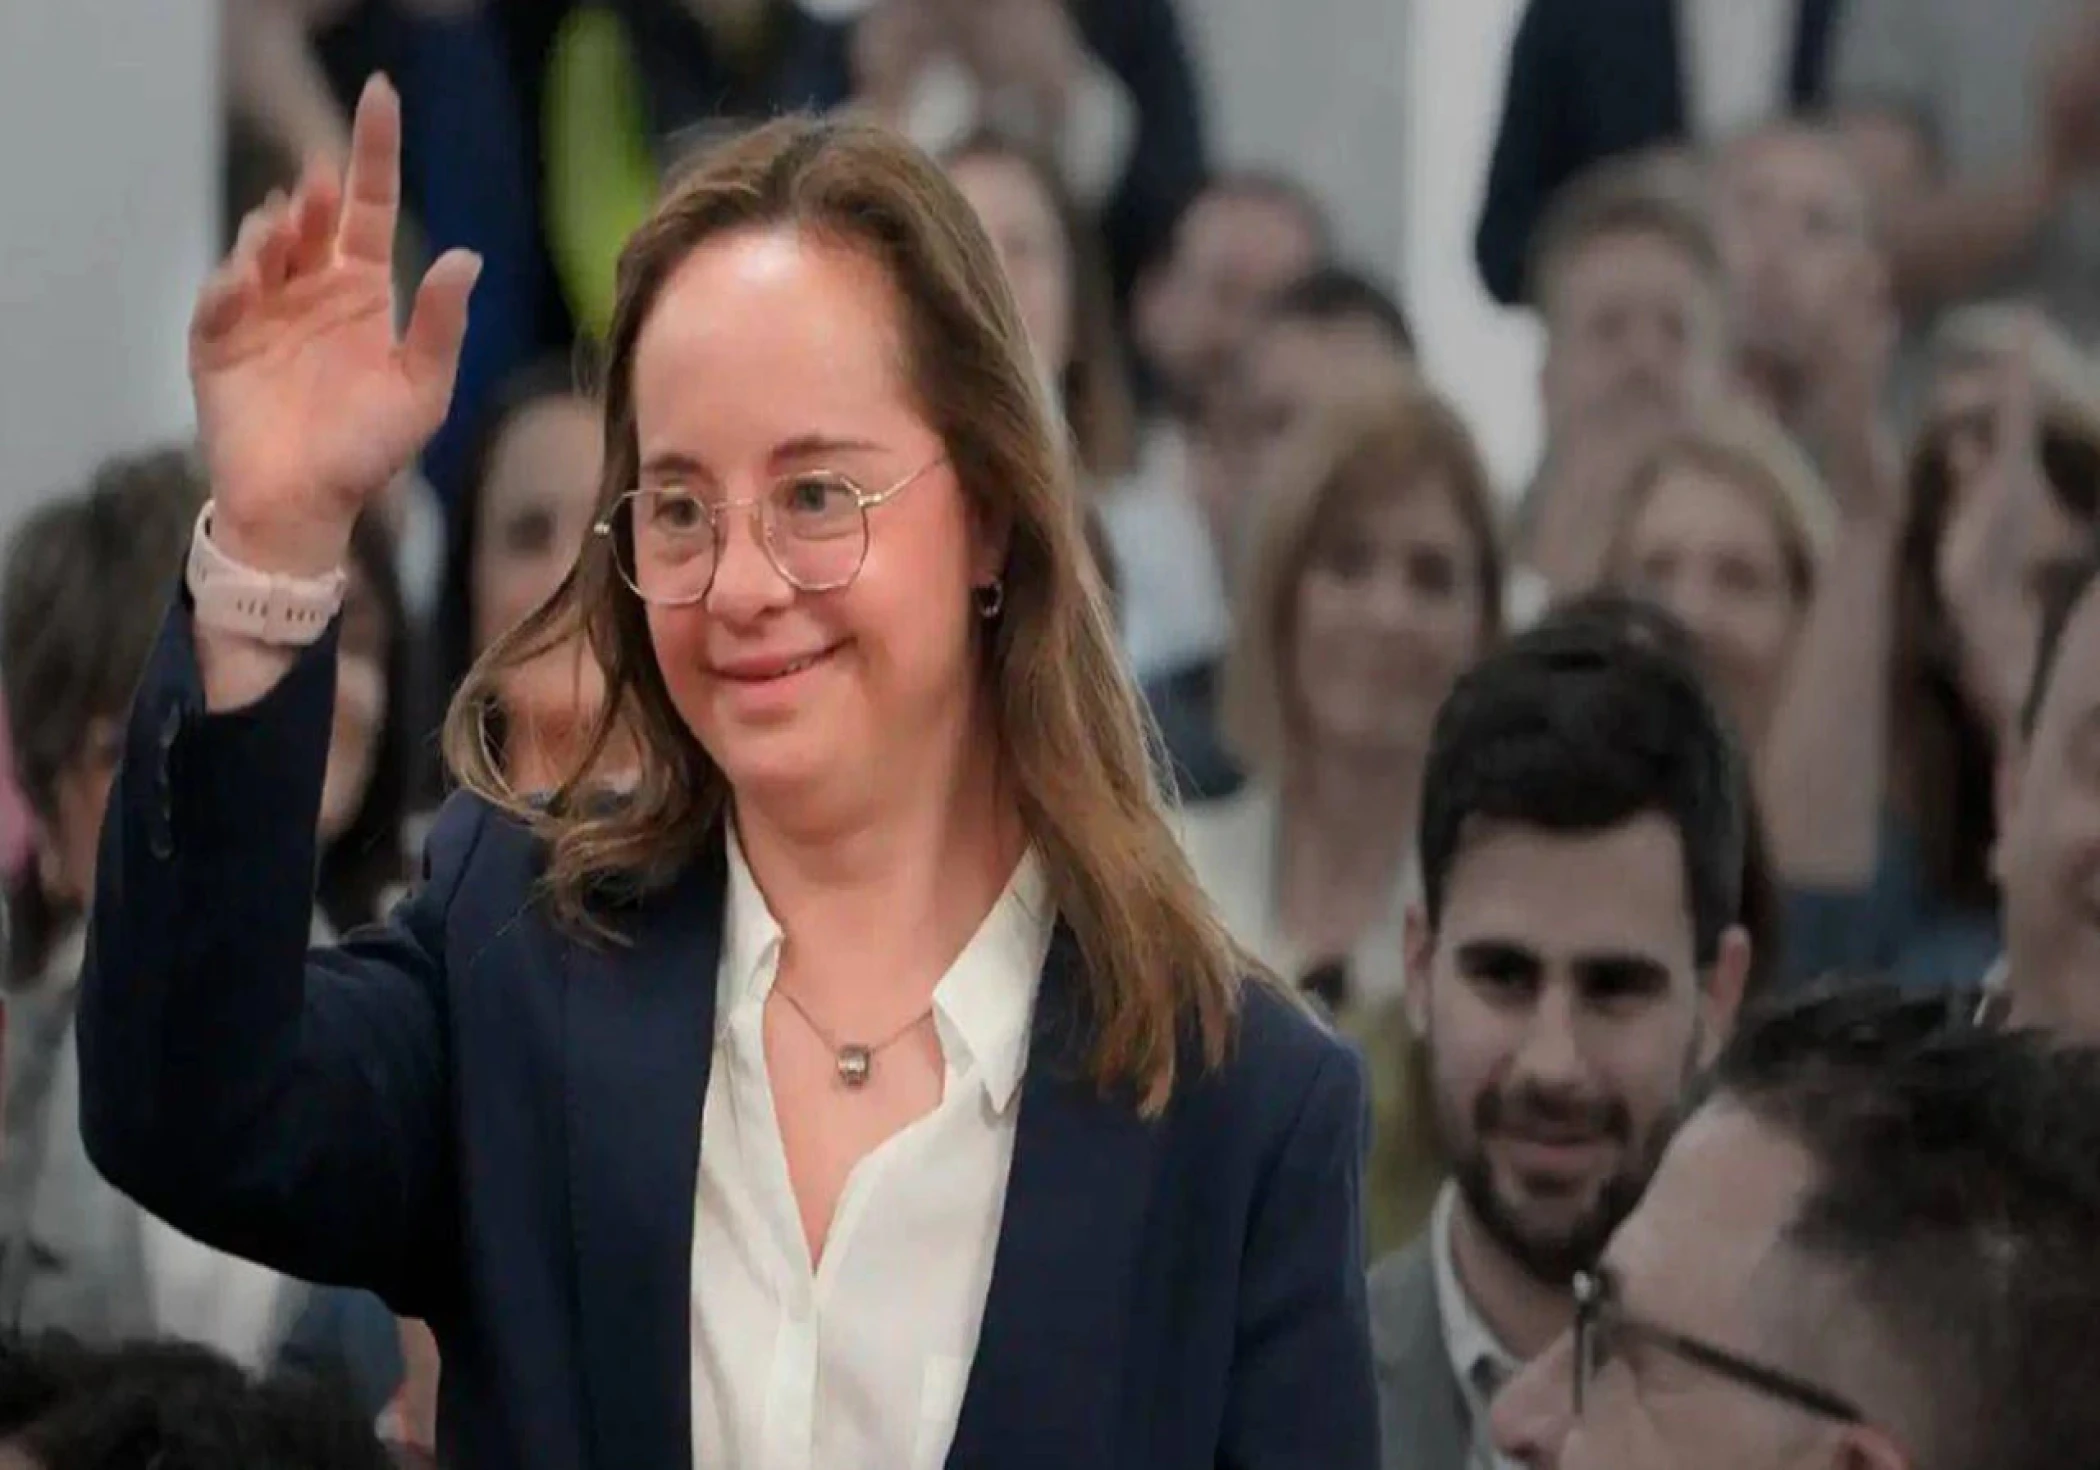 Mar Galcerán: Spain Woman With Down Syndrome Wins Election